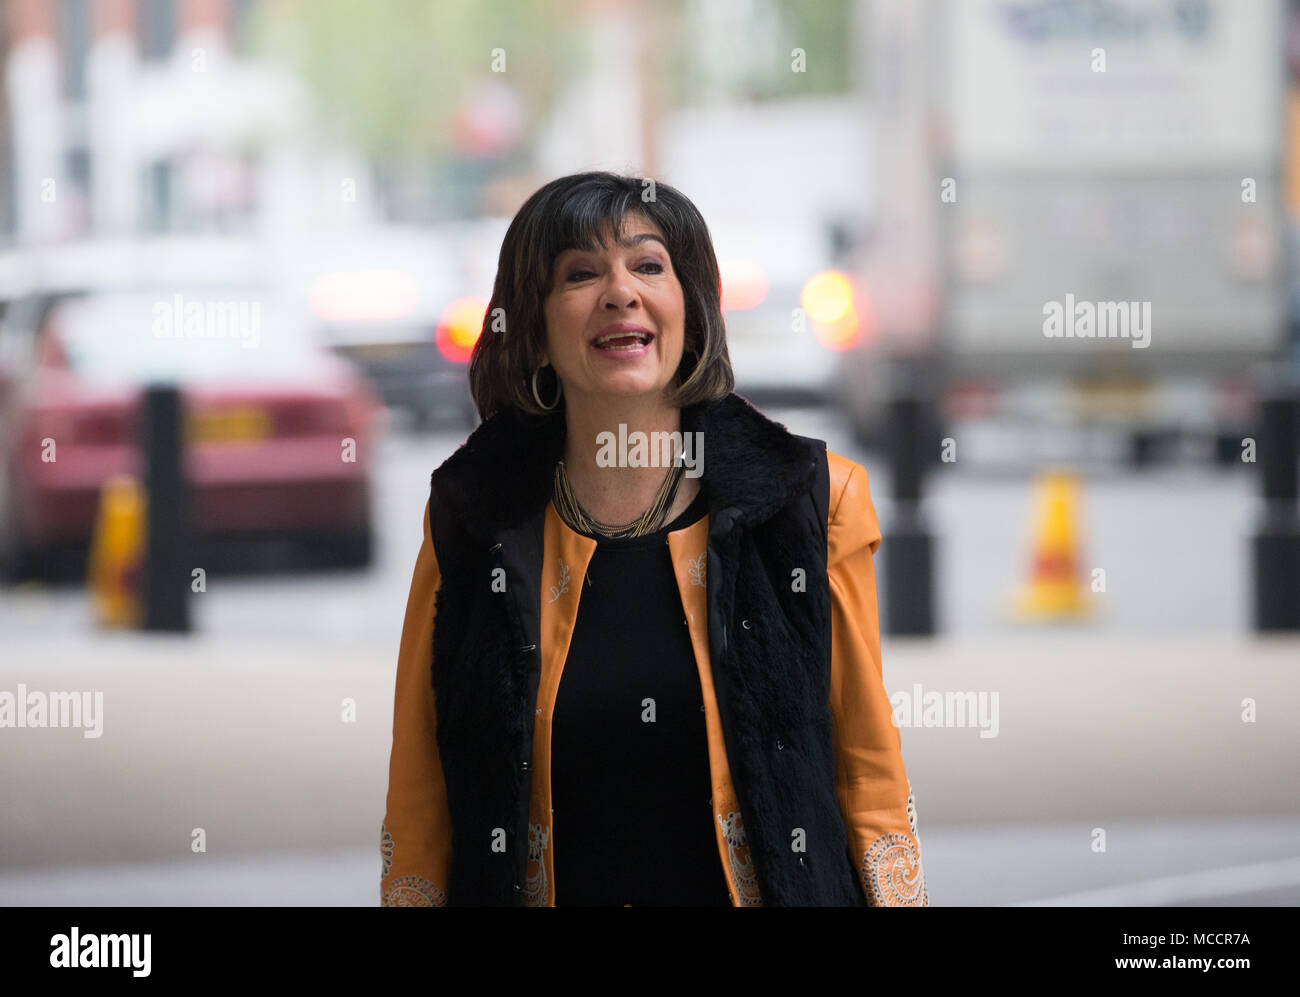 Chief International Correspondent for CNN, Christiane Amanpour, arrives at the BBC to appear on 'The Andrew Marr Show'. Stock Photo